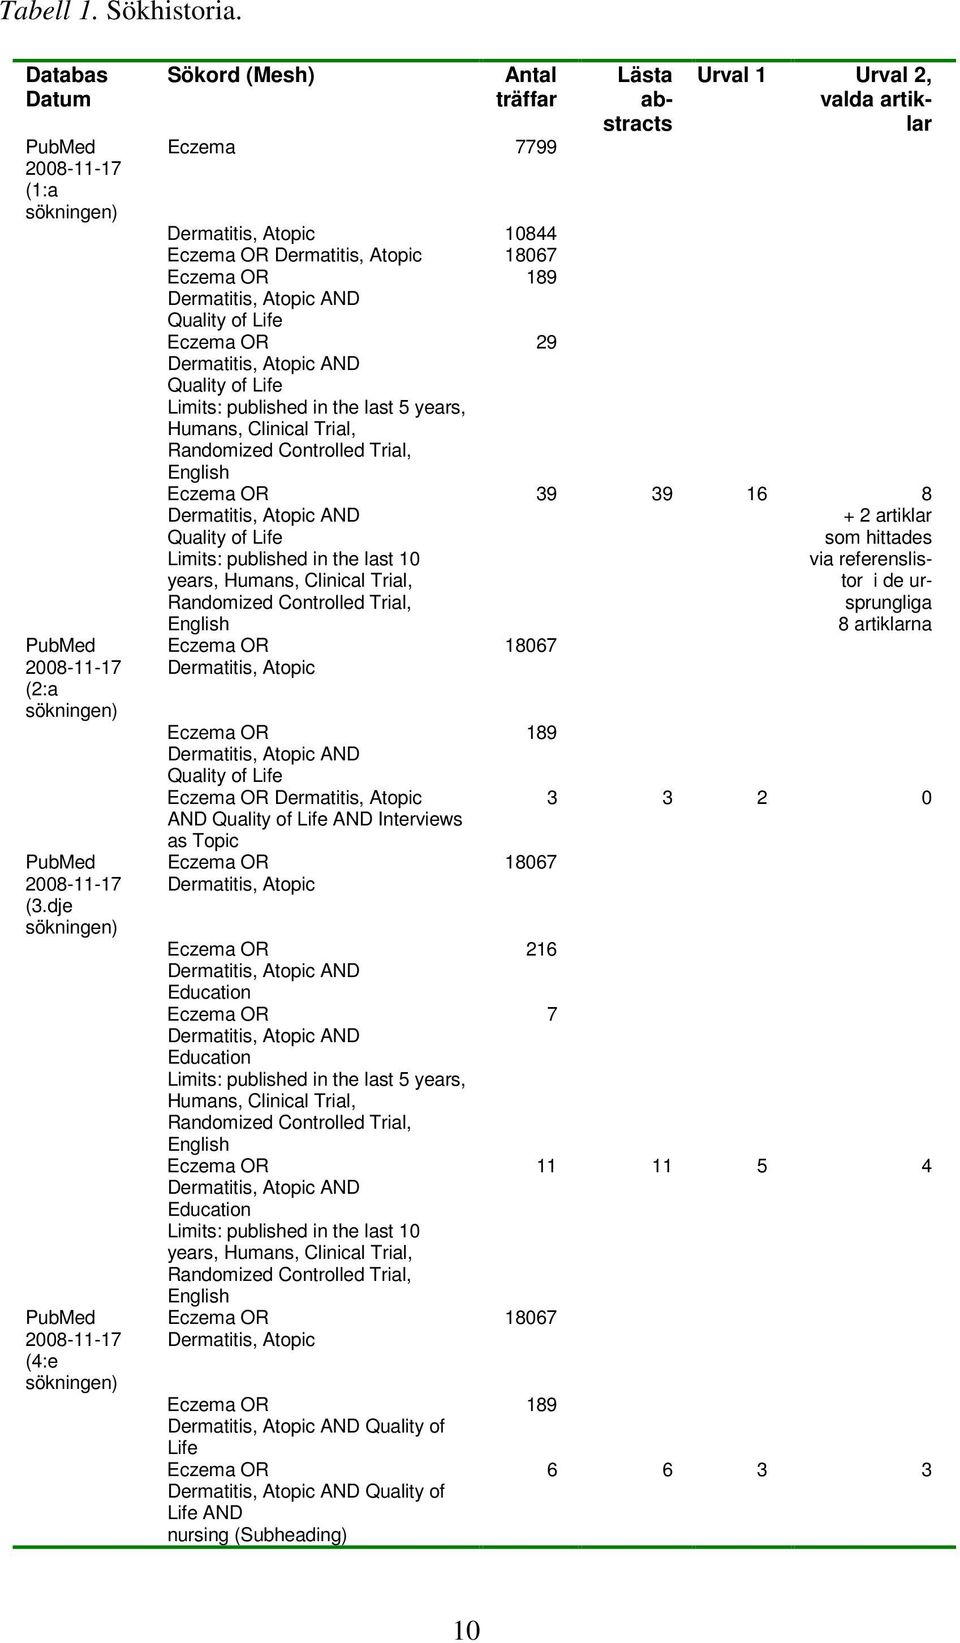 Life Eczema OR 29 Dermatitis, Atopic AND Quality of Life Limits: published in the last 5 years, Humans, Clinical Trial, Randomized Controlled Trial, English Eczema OR Dermatitis, Atopic AND Quality